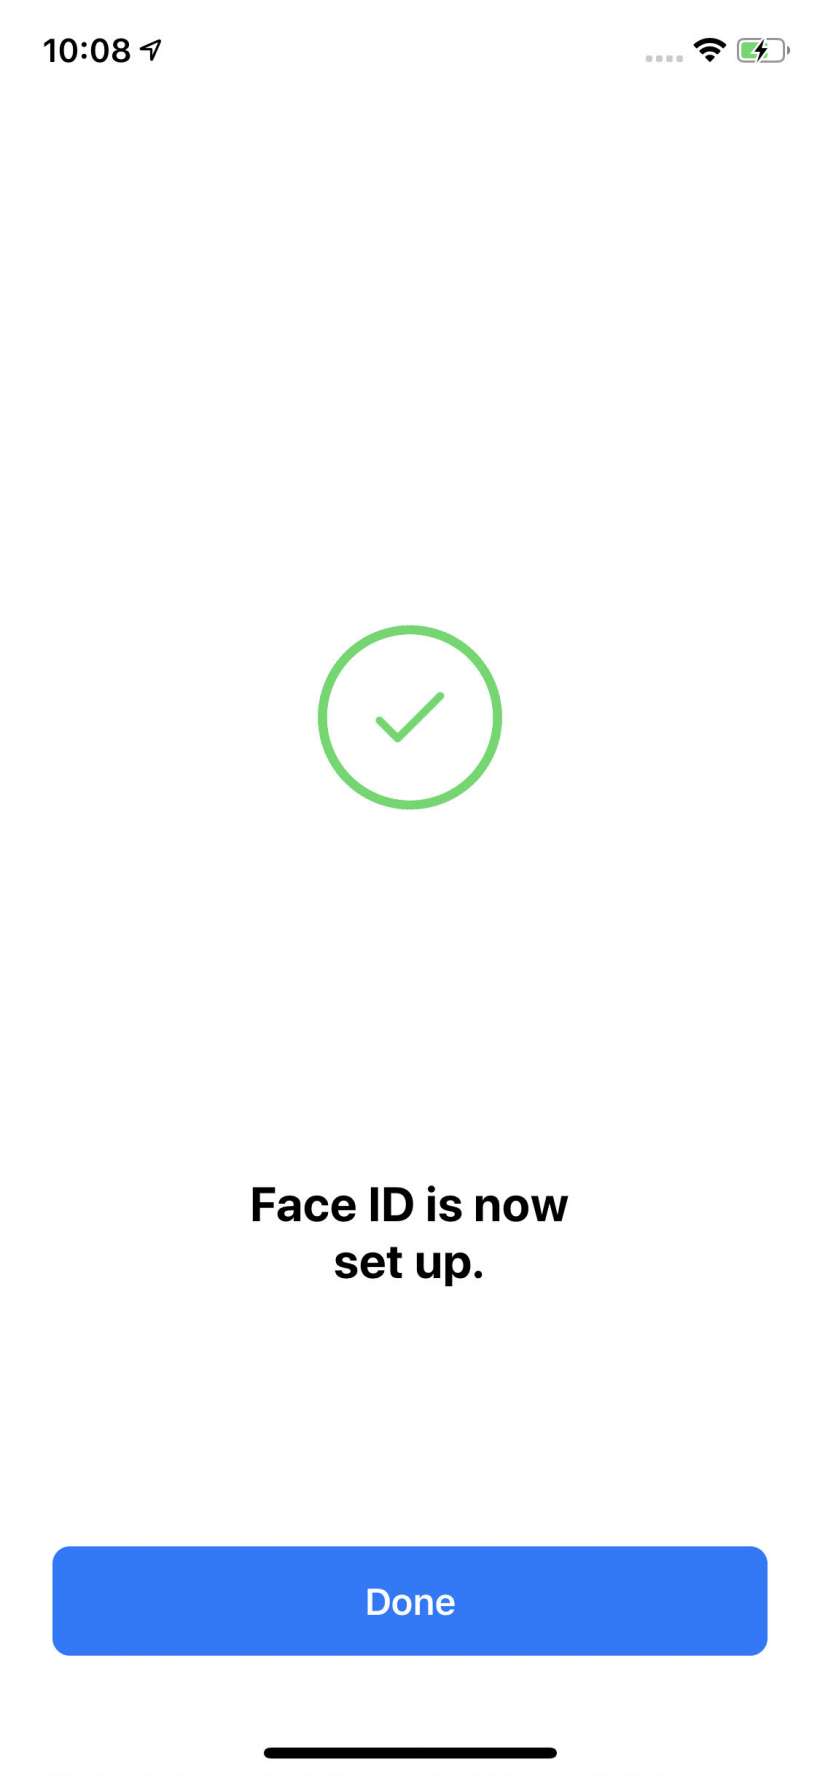 How to set up an alternate Face ID appearance on iPhone X.